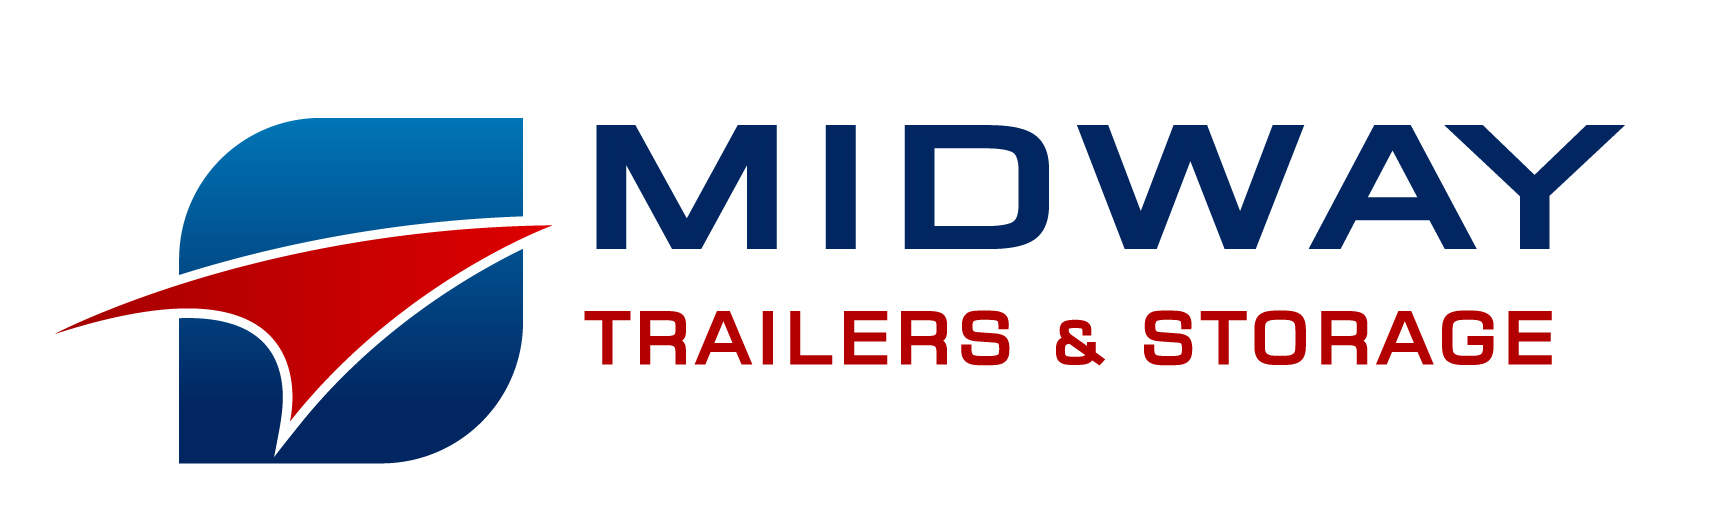 Midway Trailers and storage